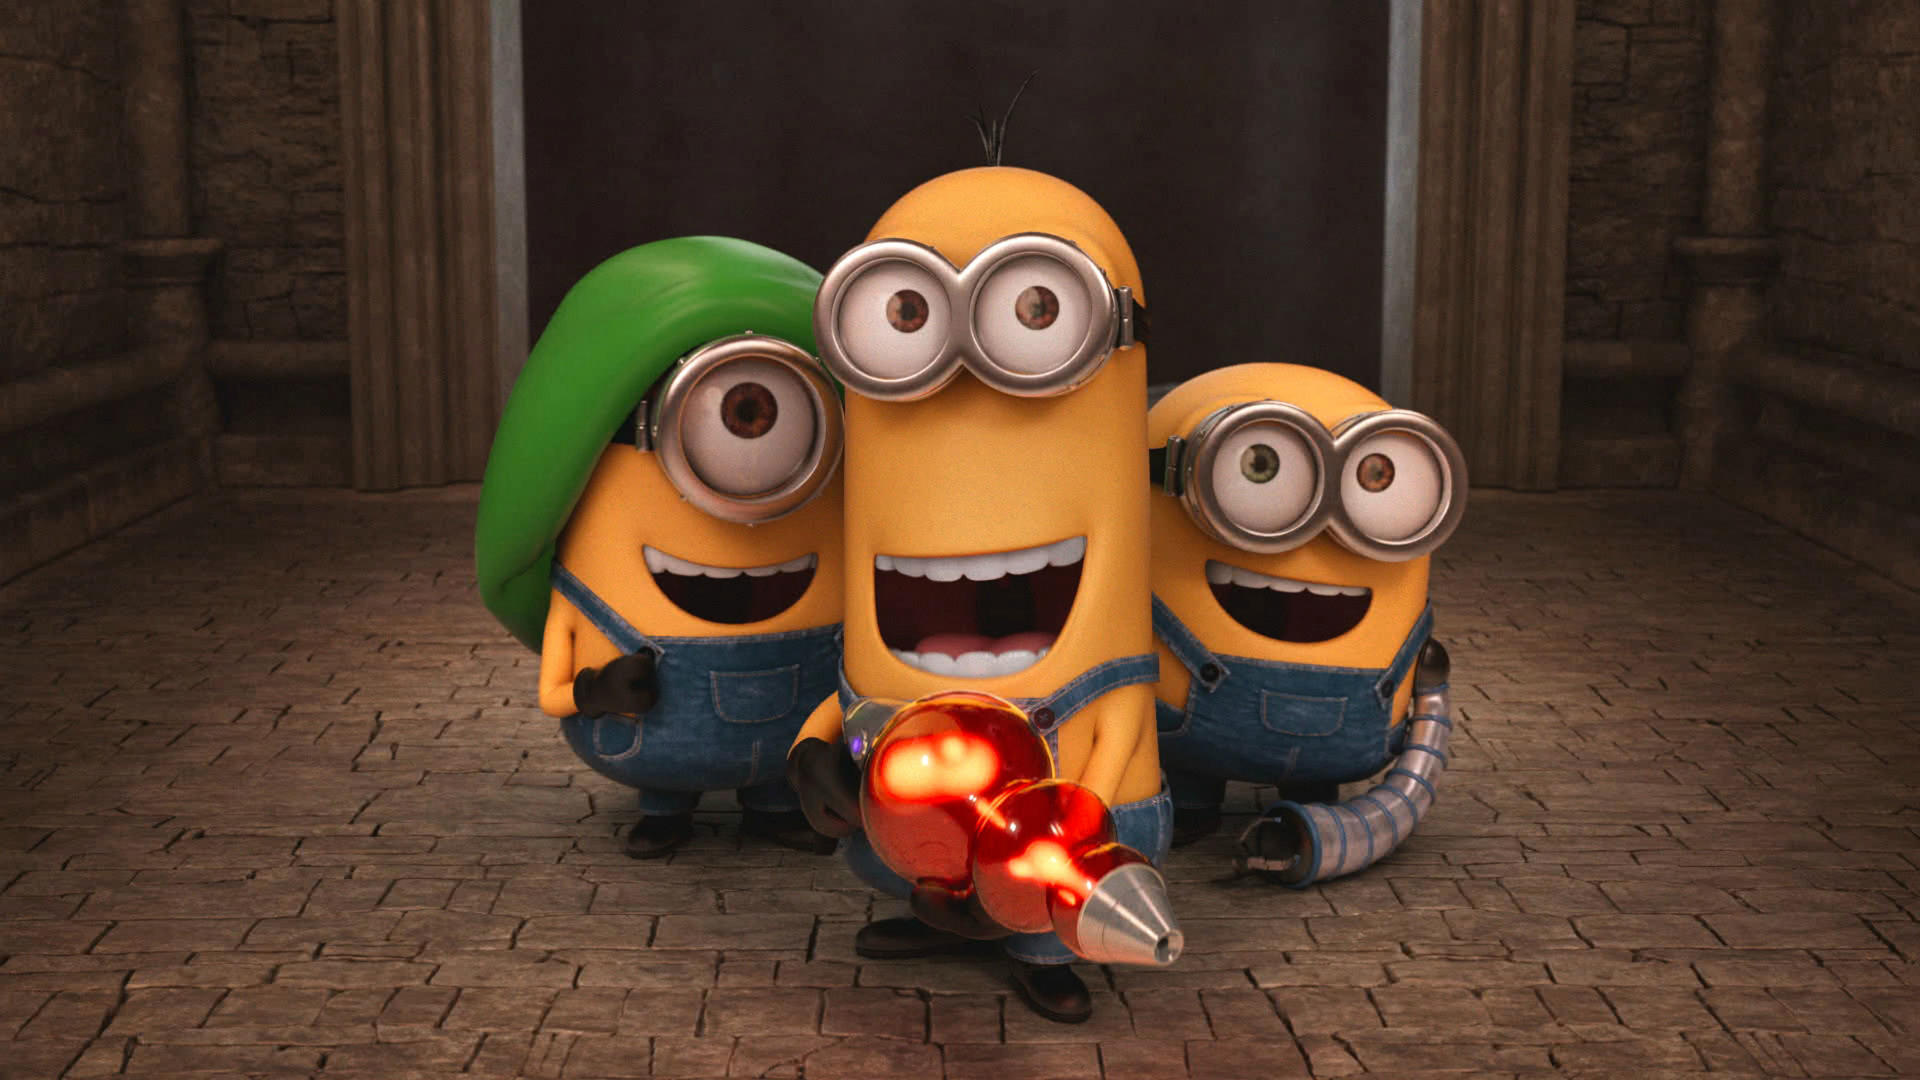 Meet the 'Minions': Your Adorable Guide to the Good and the Not-So-Good 